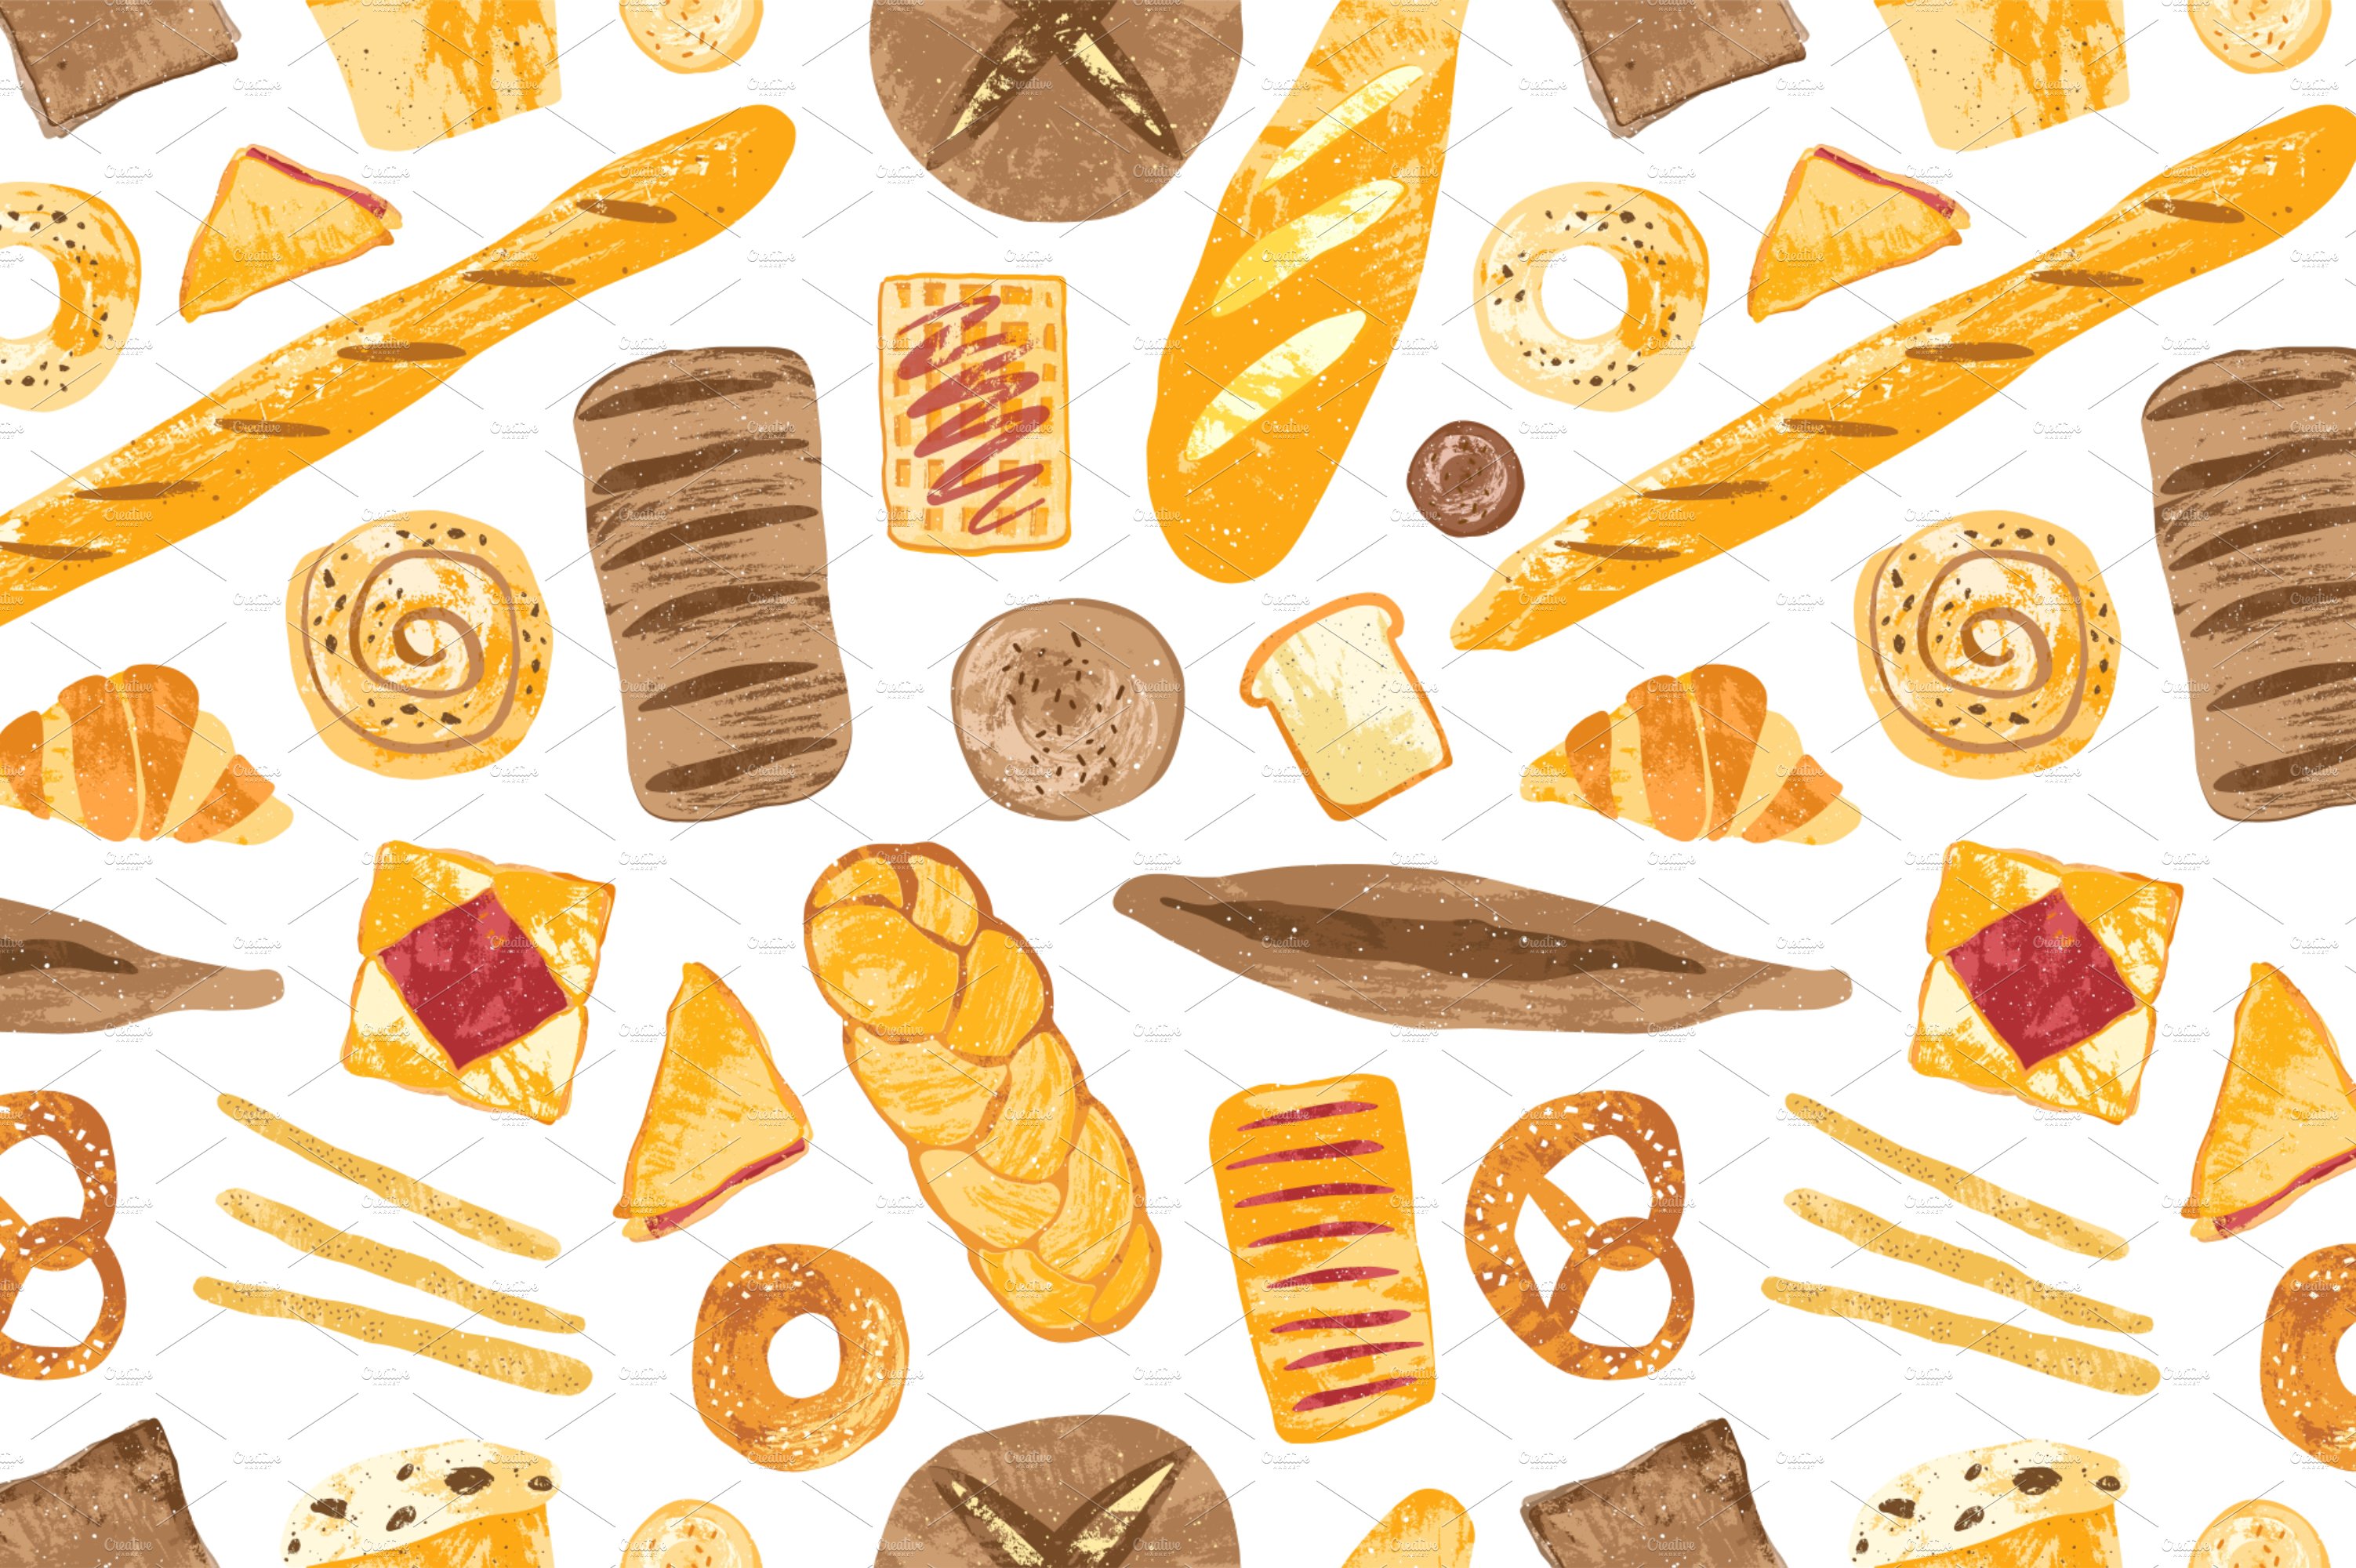 Bakery patterns preview image.